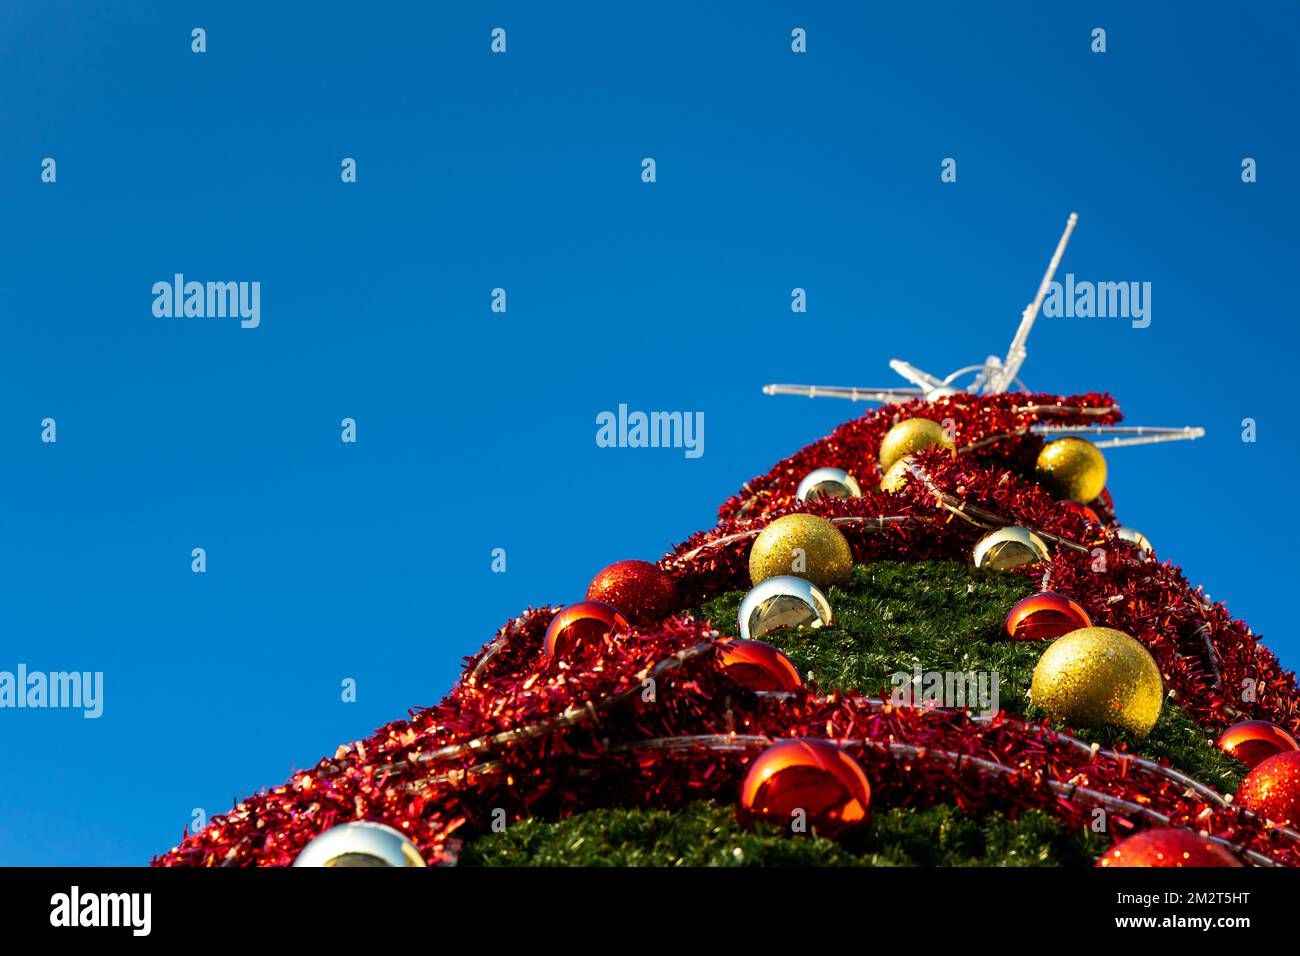 The top of an urban Christmas tree against a blue sky. Artificial green Christmas tree dressed in lights, red decorations and Christmas tree bubbles Stock Photo